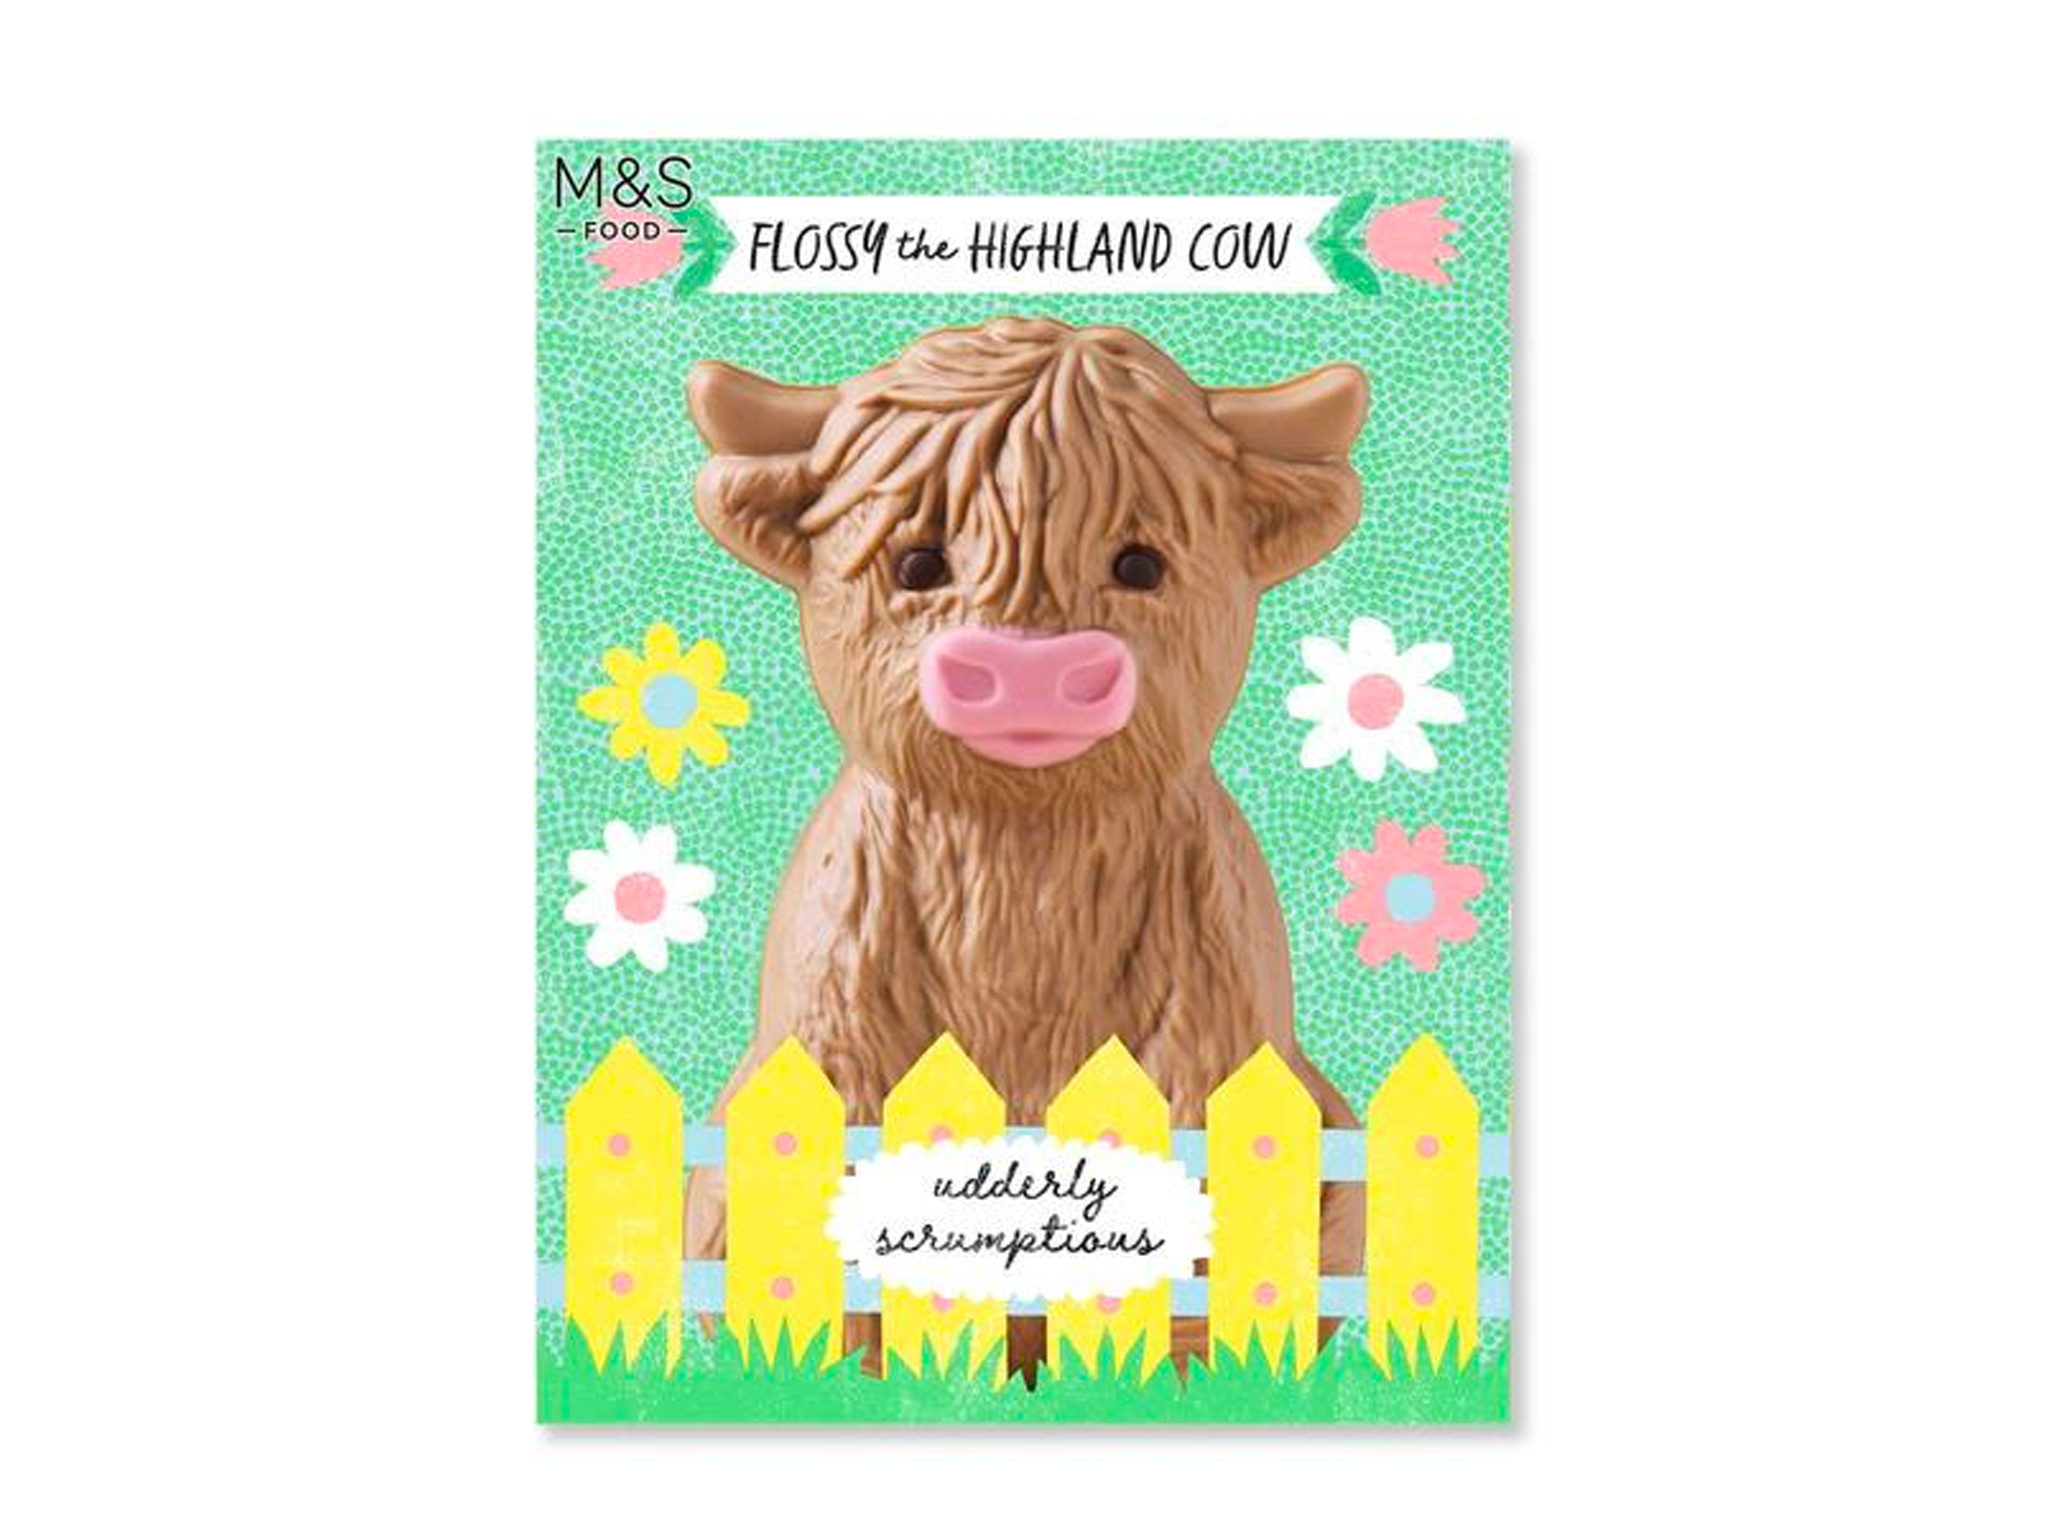 Flossy-highland-cow-indybest